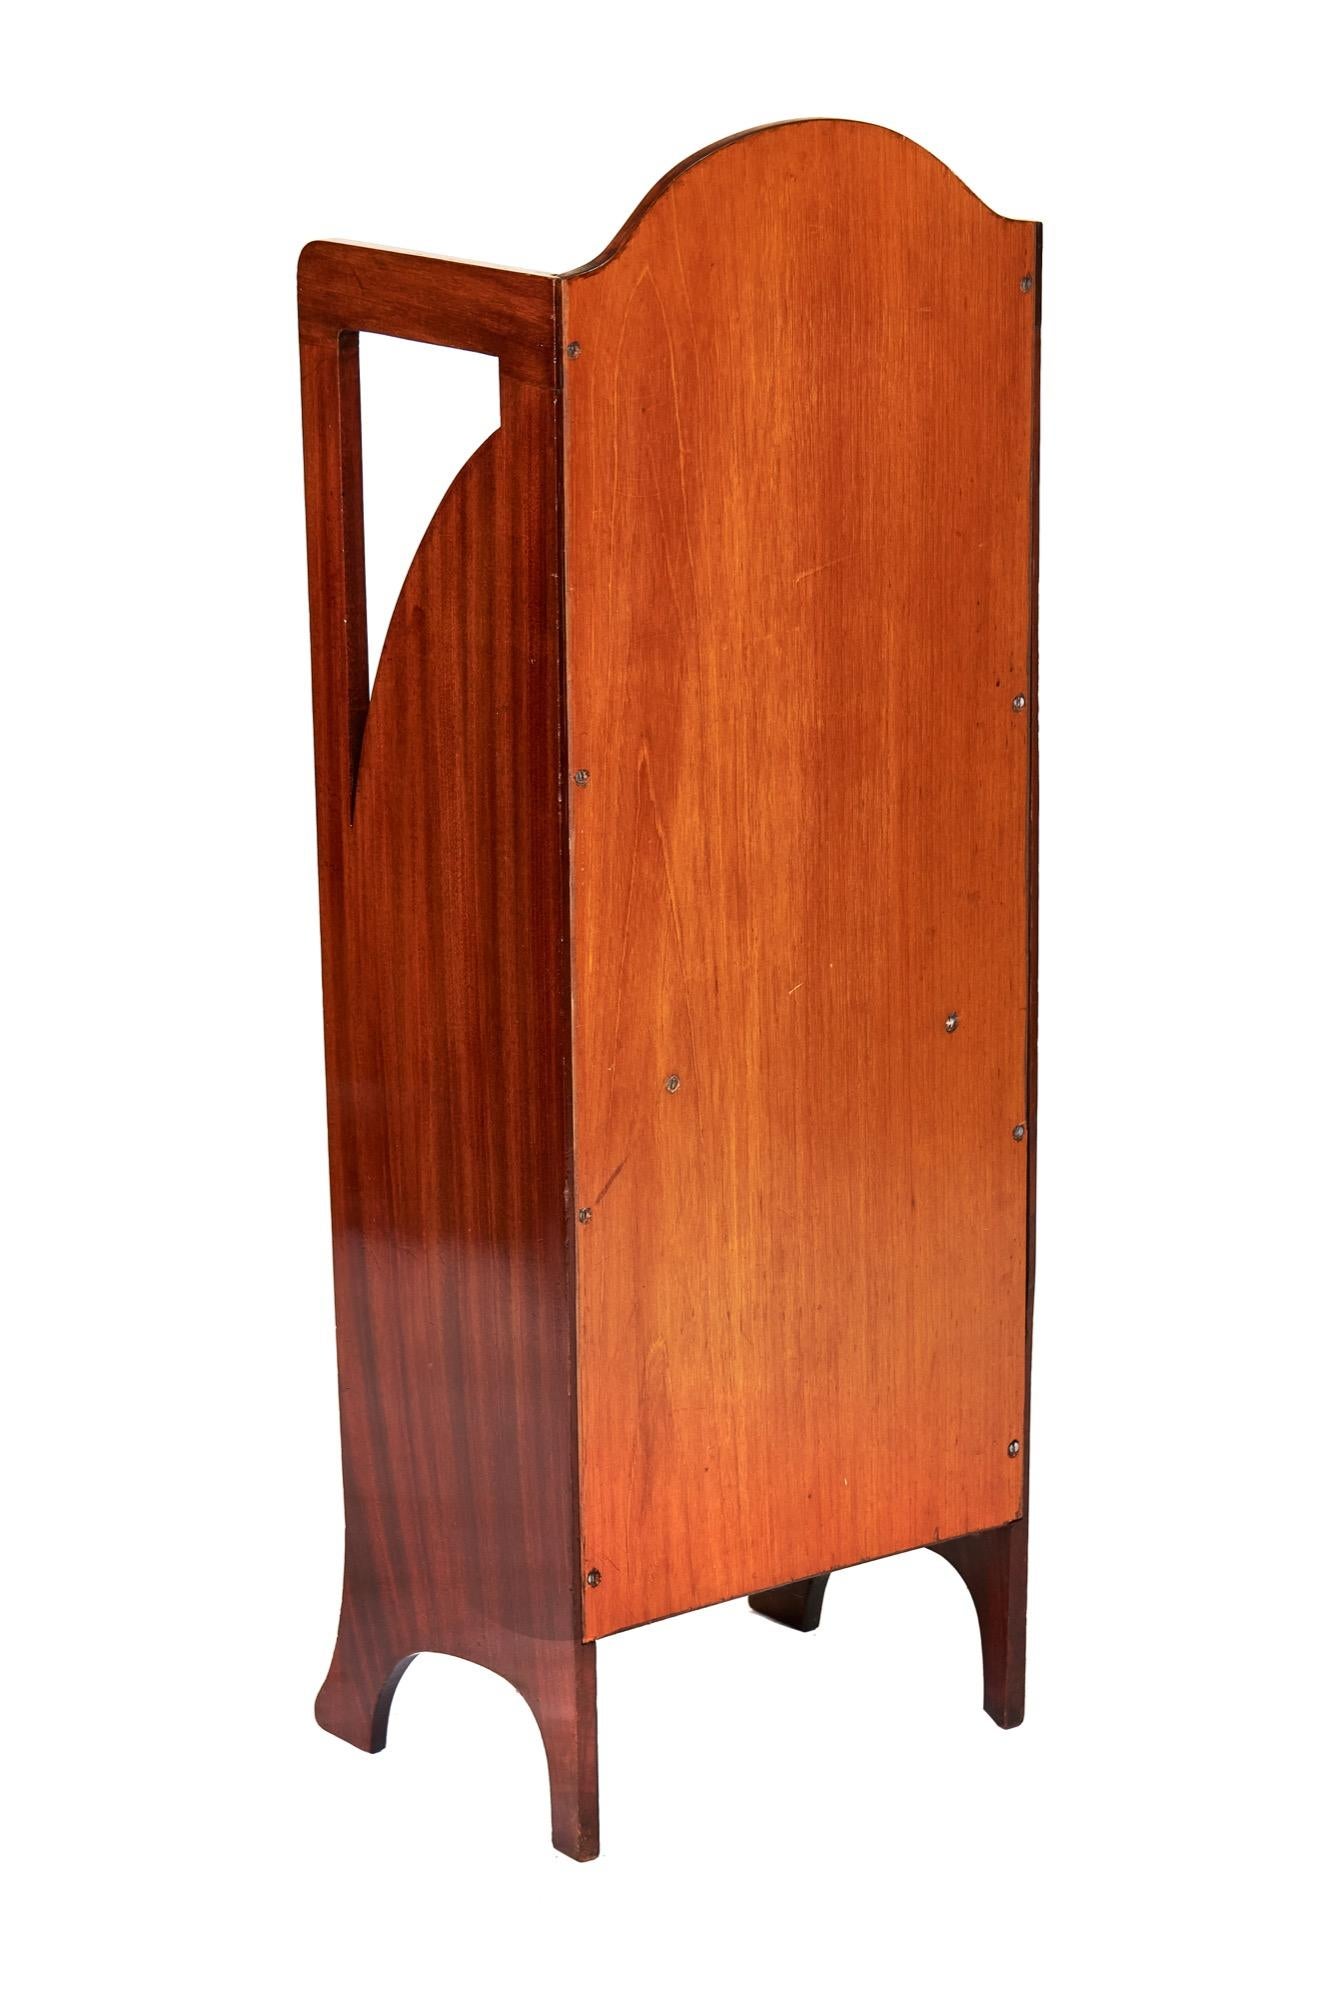 Antique Edwardian mahogany inlaid magazine rack having pretty boxwood inlay to the front edge, three storage sections for magazines and newspapers with an attractive oval fan decoration to the top of the bottom section, terminating in splayed